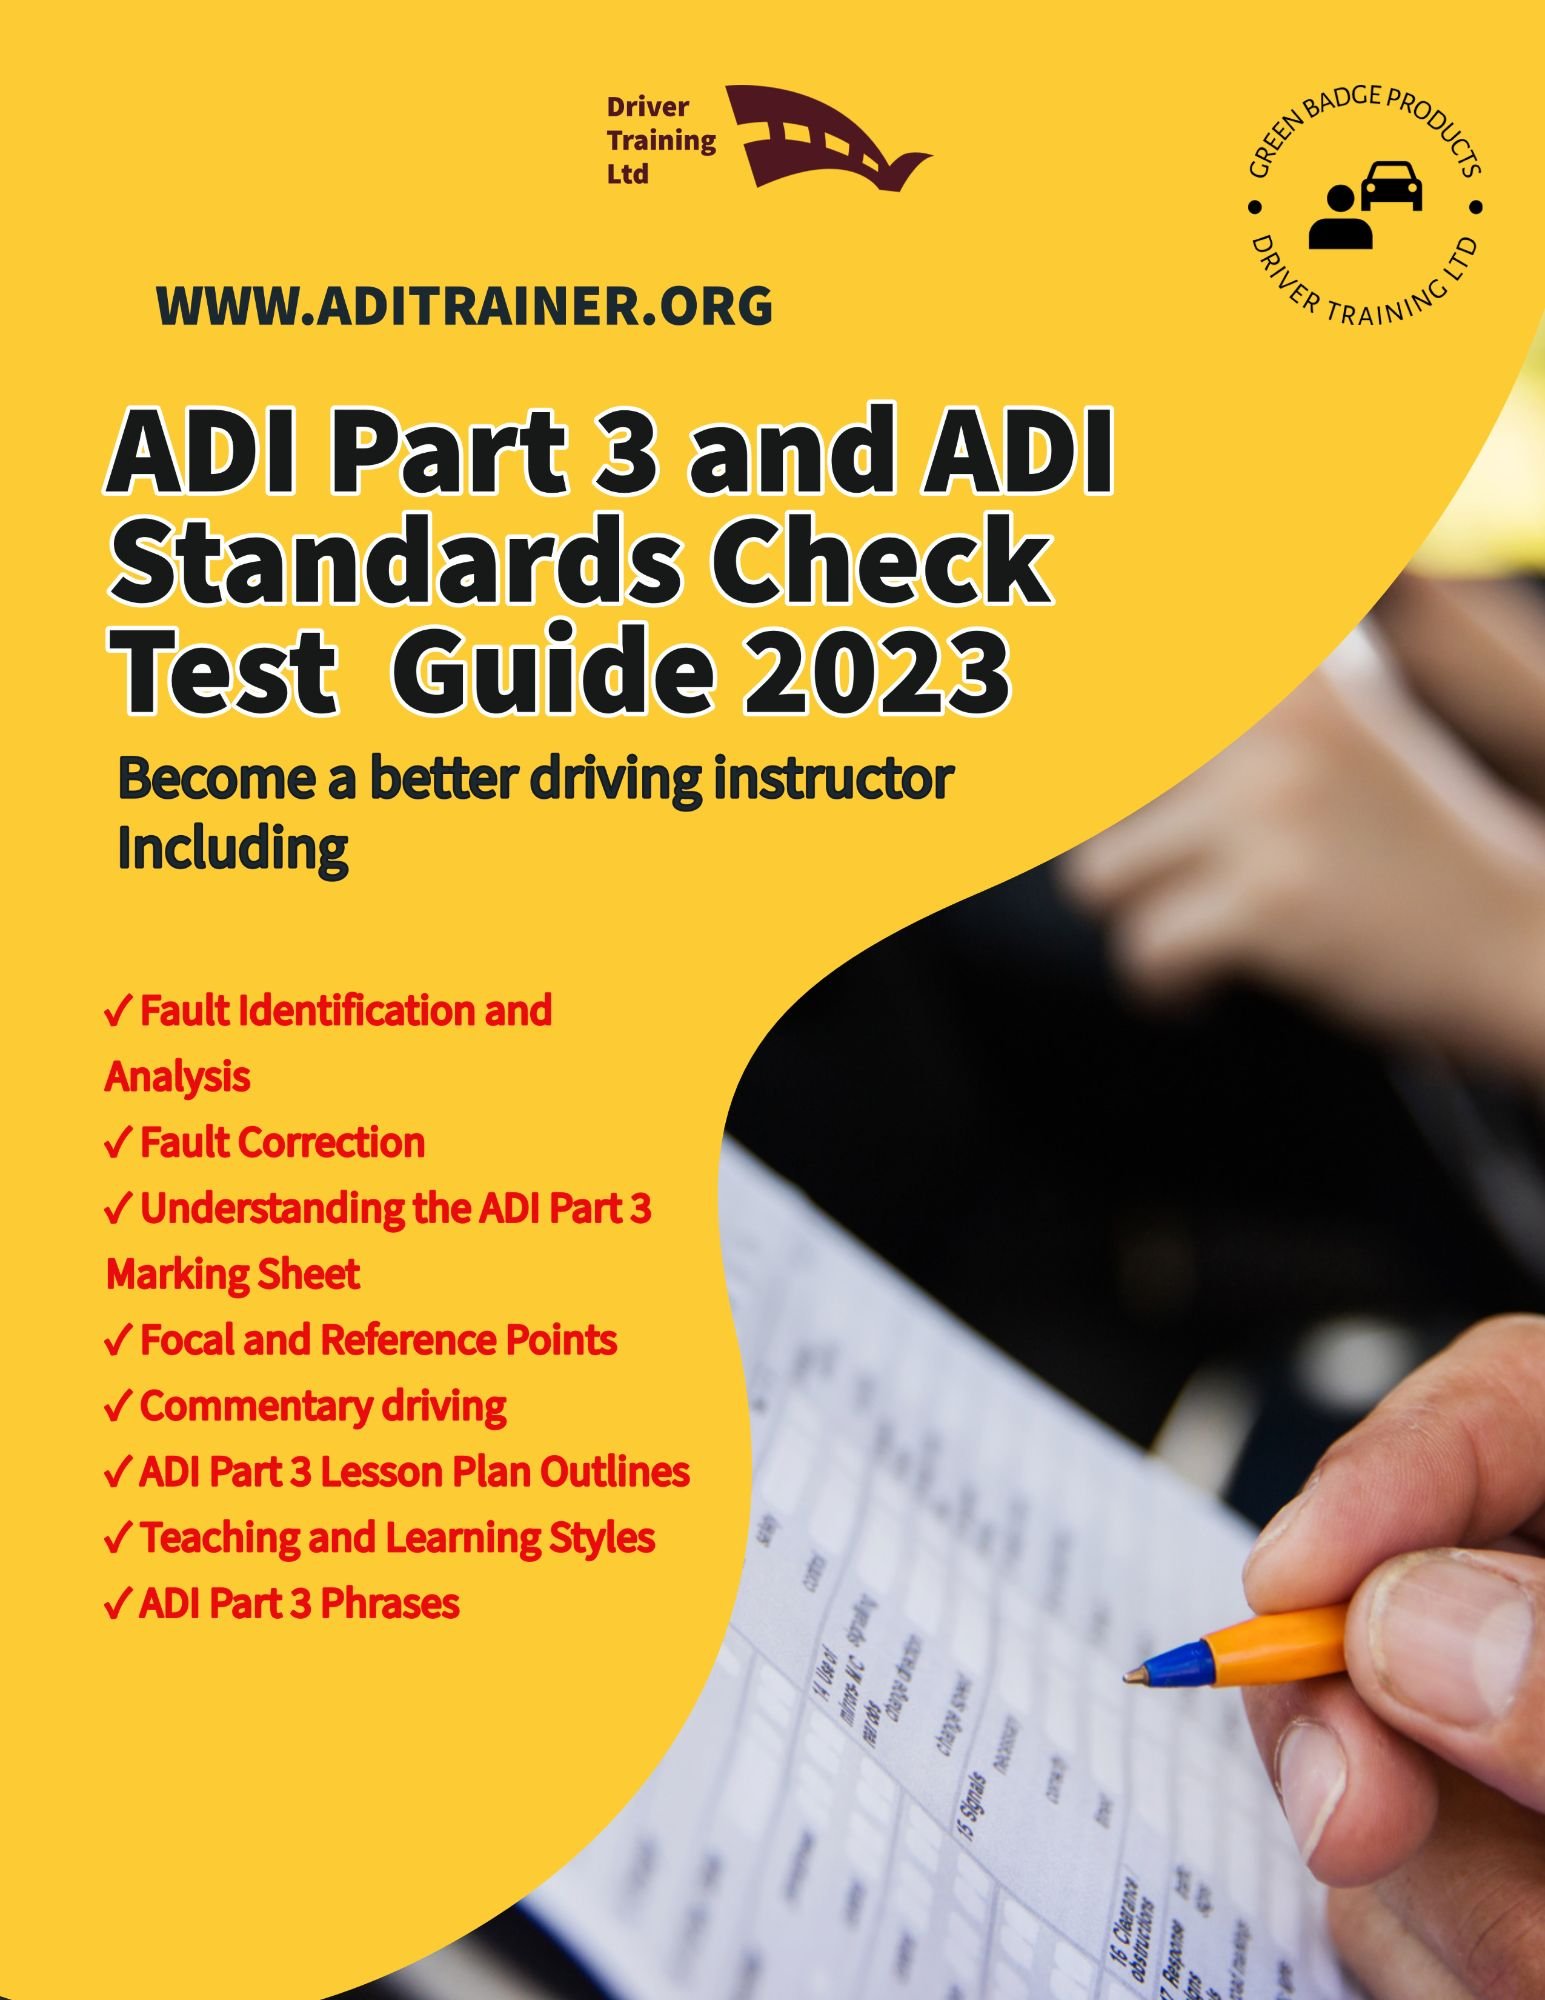 adi standards checkThis complete guide gives you the confidence and knowledge you need to become a better teacher and provide your students with a thorough understanding of all subjects.  * 80 Pages - Quality printed on glossy 120gsm paper.  Each subject is comprehensively covered including understanding the marking sheet, fault identification, Fault Analysis and Pupil Reference Points.  The thicker covers ensure durability and ease of usetest guide